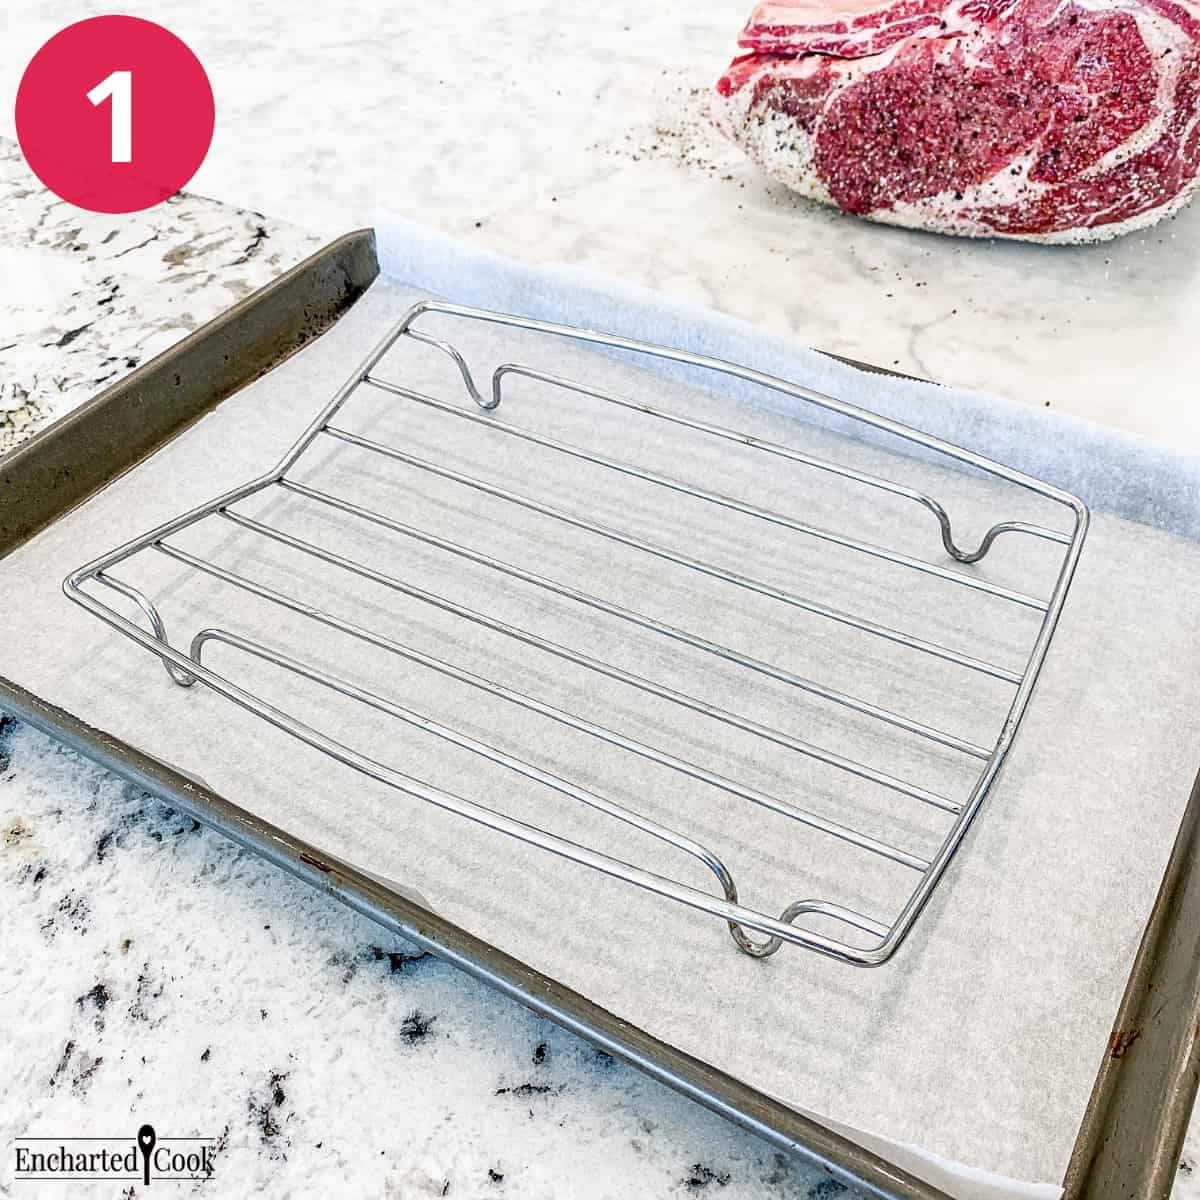 Process Photo 1 - Place a roasting rack on a rimmed baking sheet lined with parchment paper.